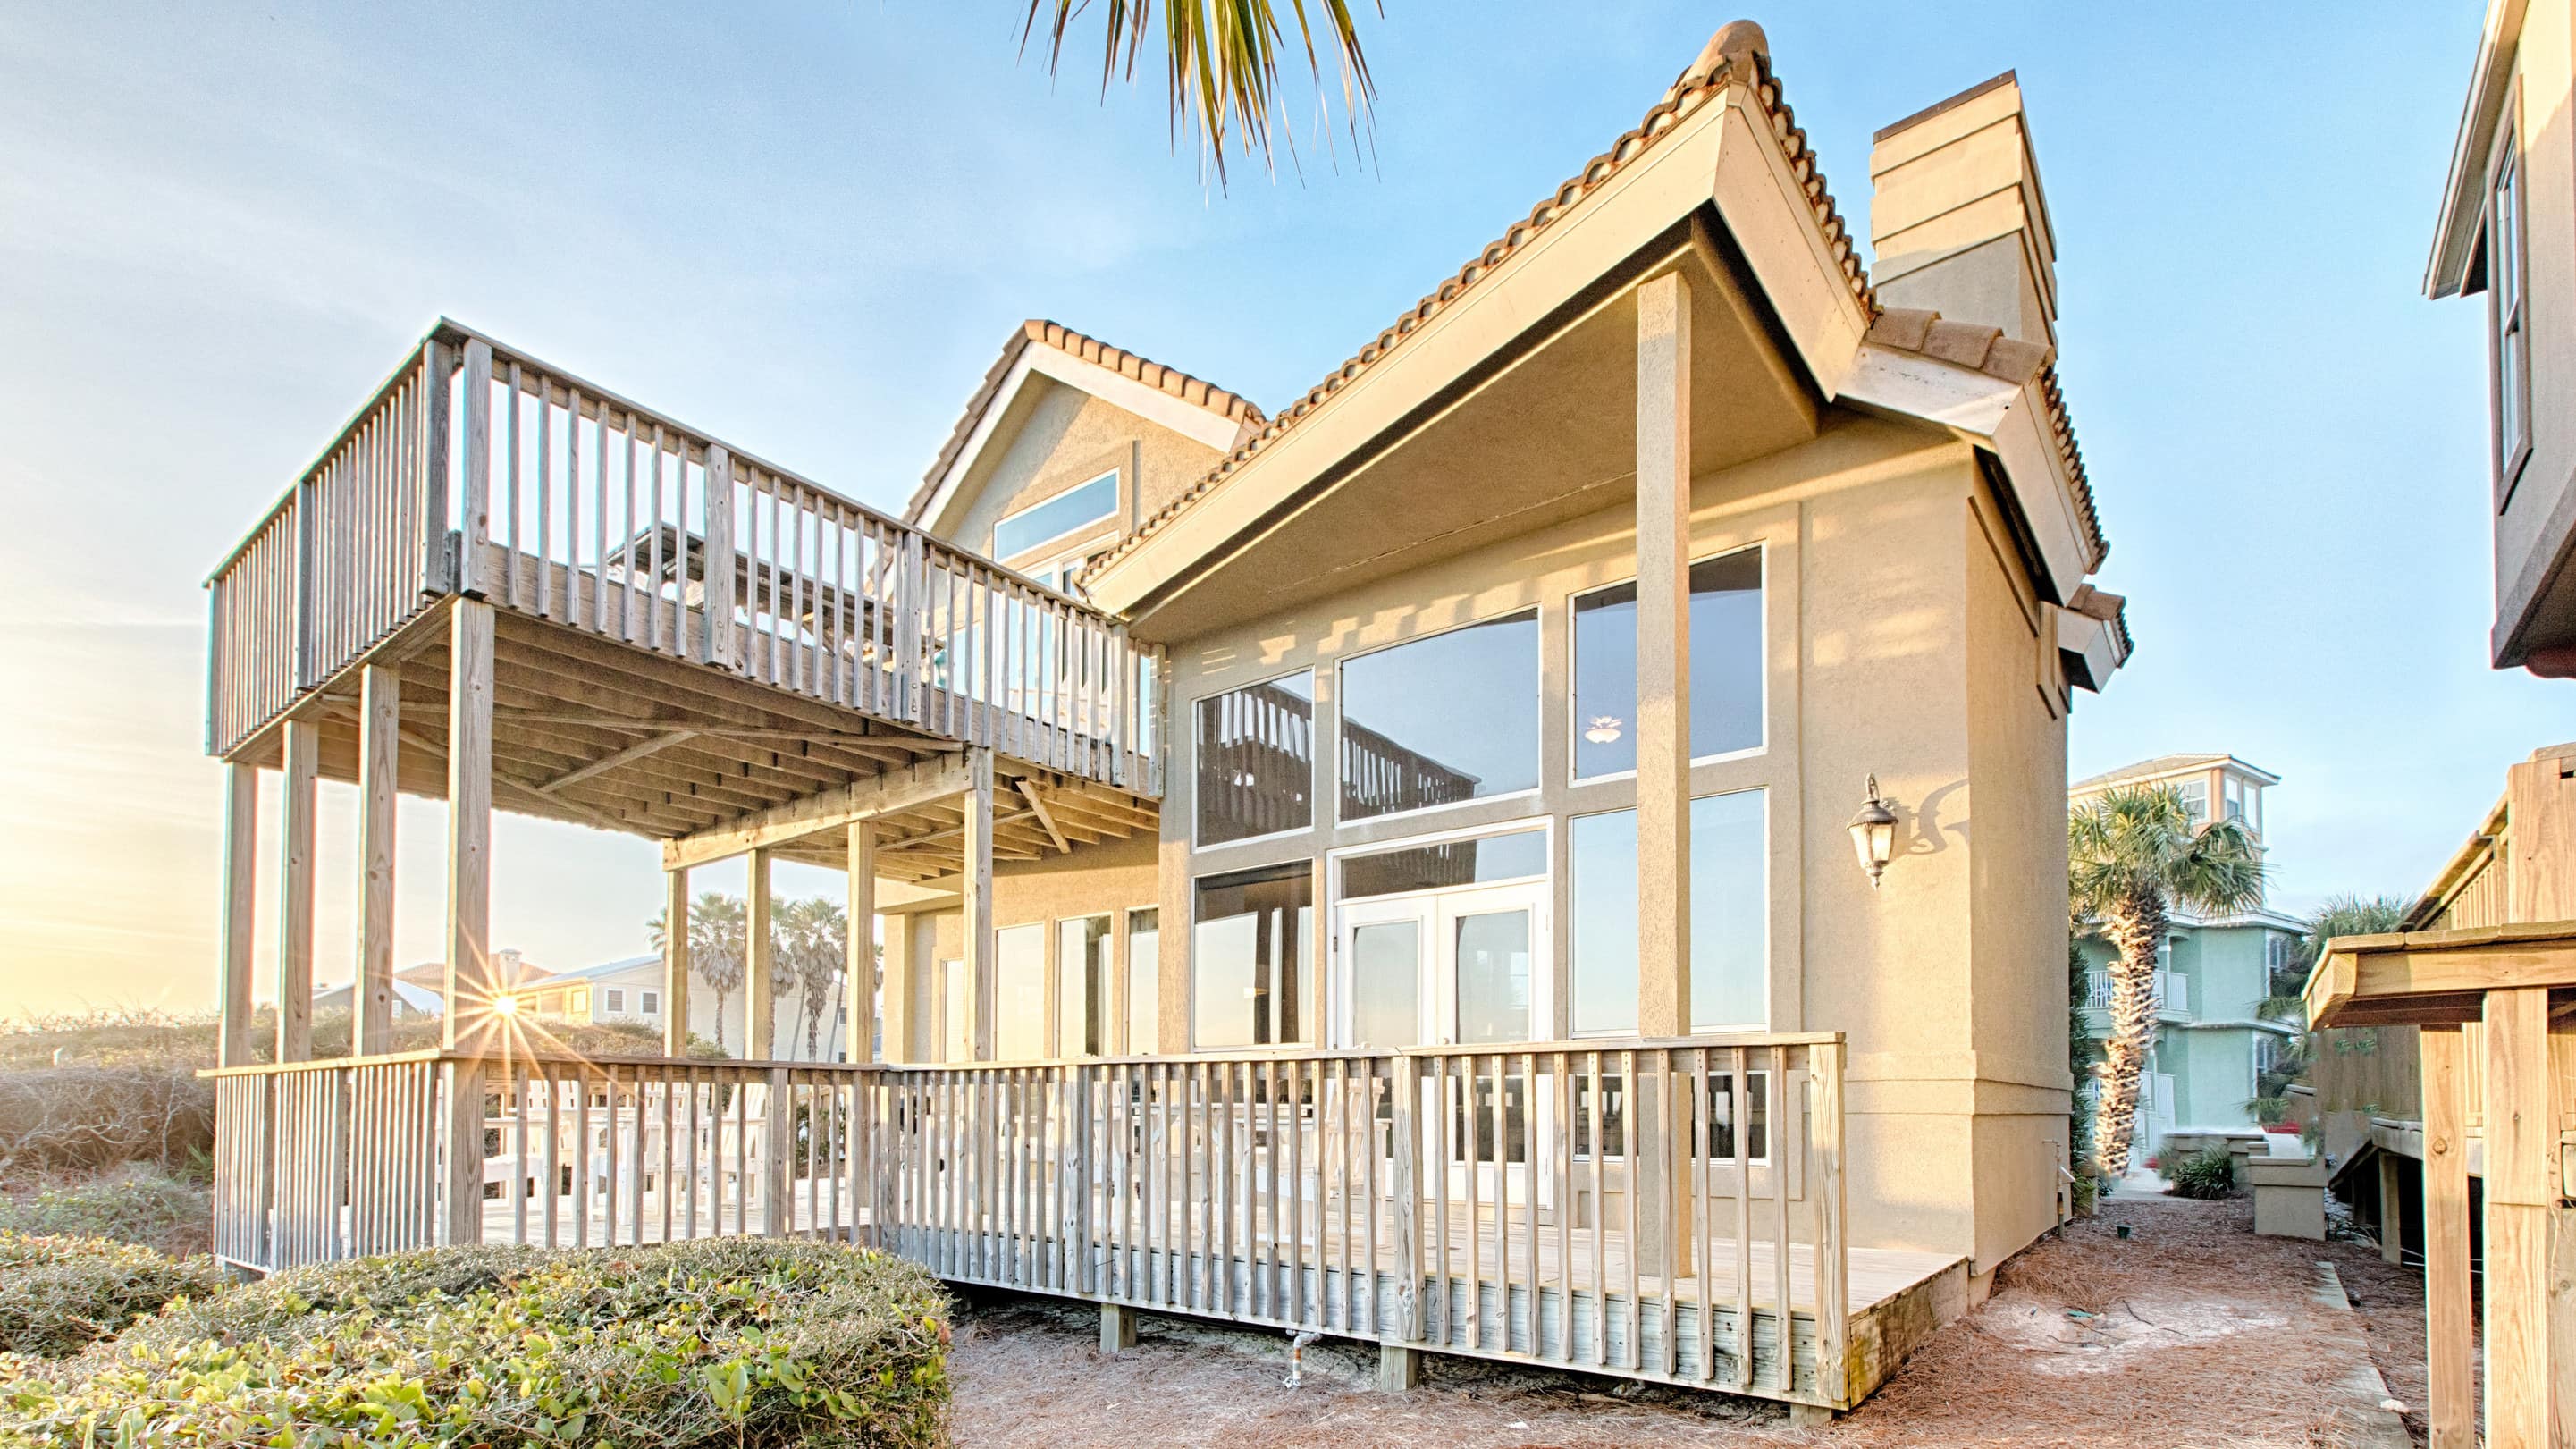 All about amazing Seagrove Beach rentals